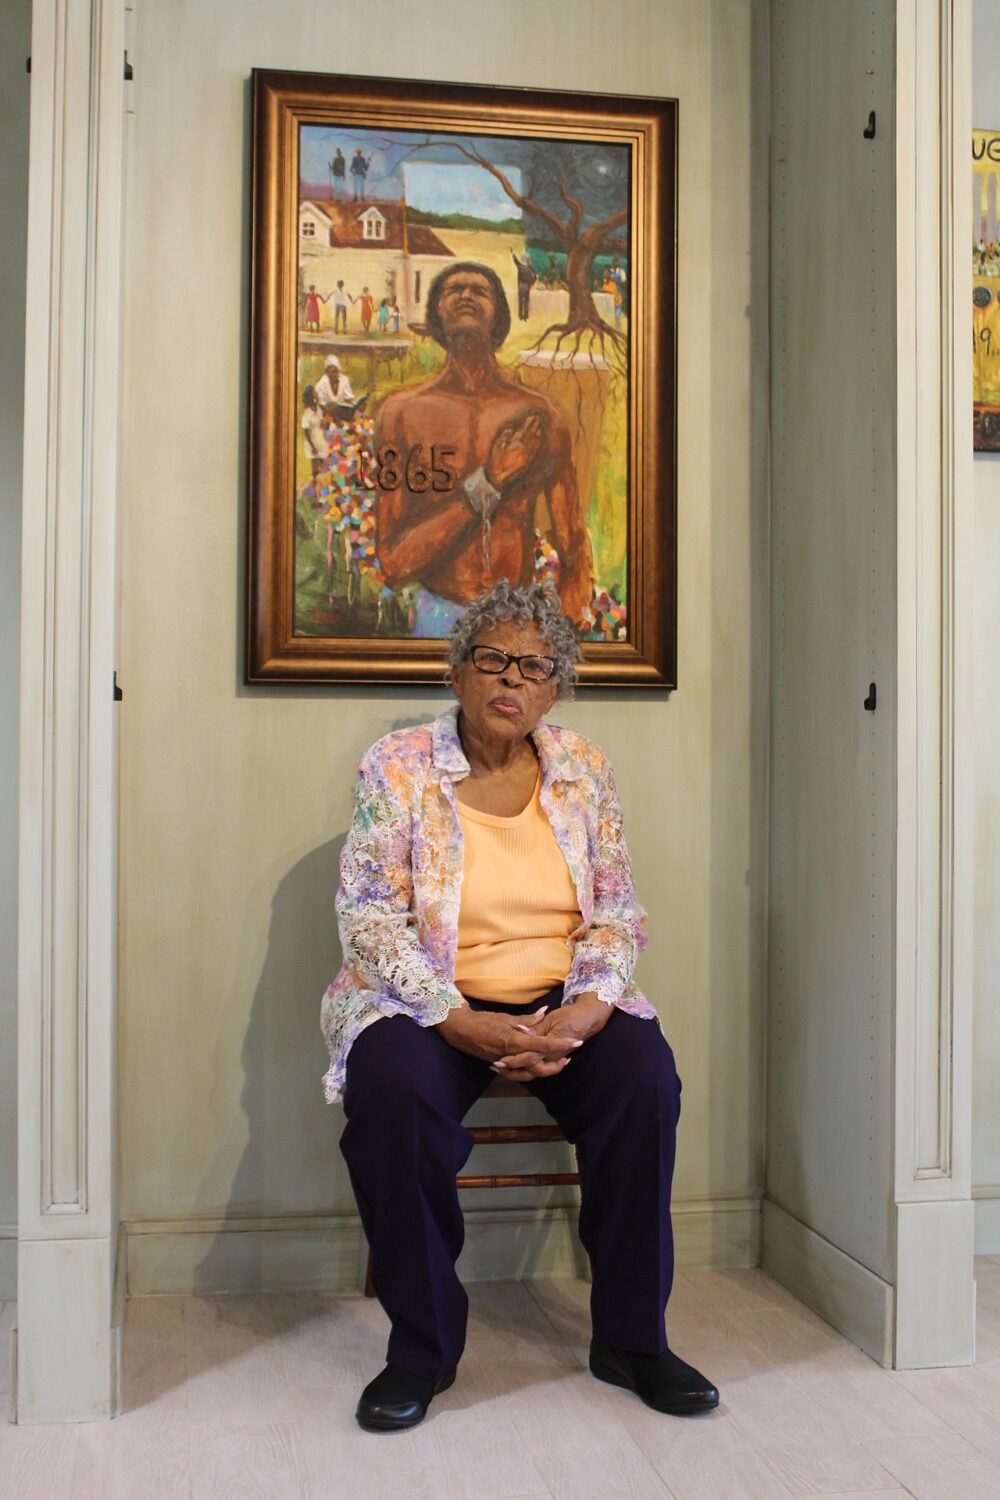 Lee seated in an alcove in front of a painting depicting a Black slave wearing broken chains and text reading "1865"